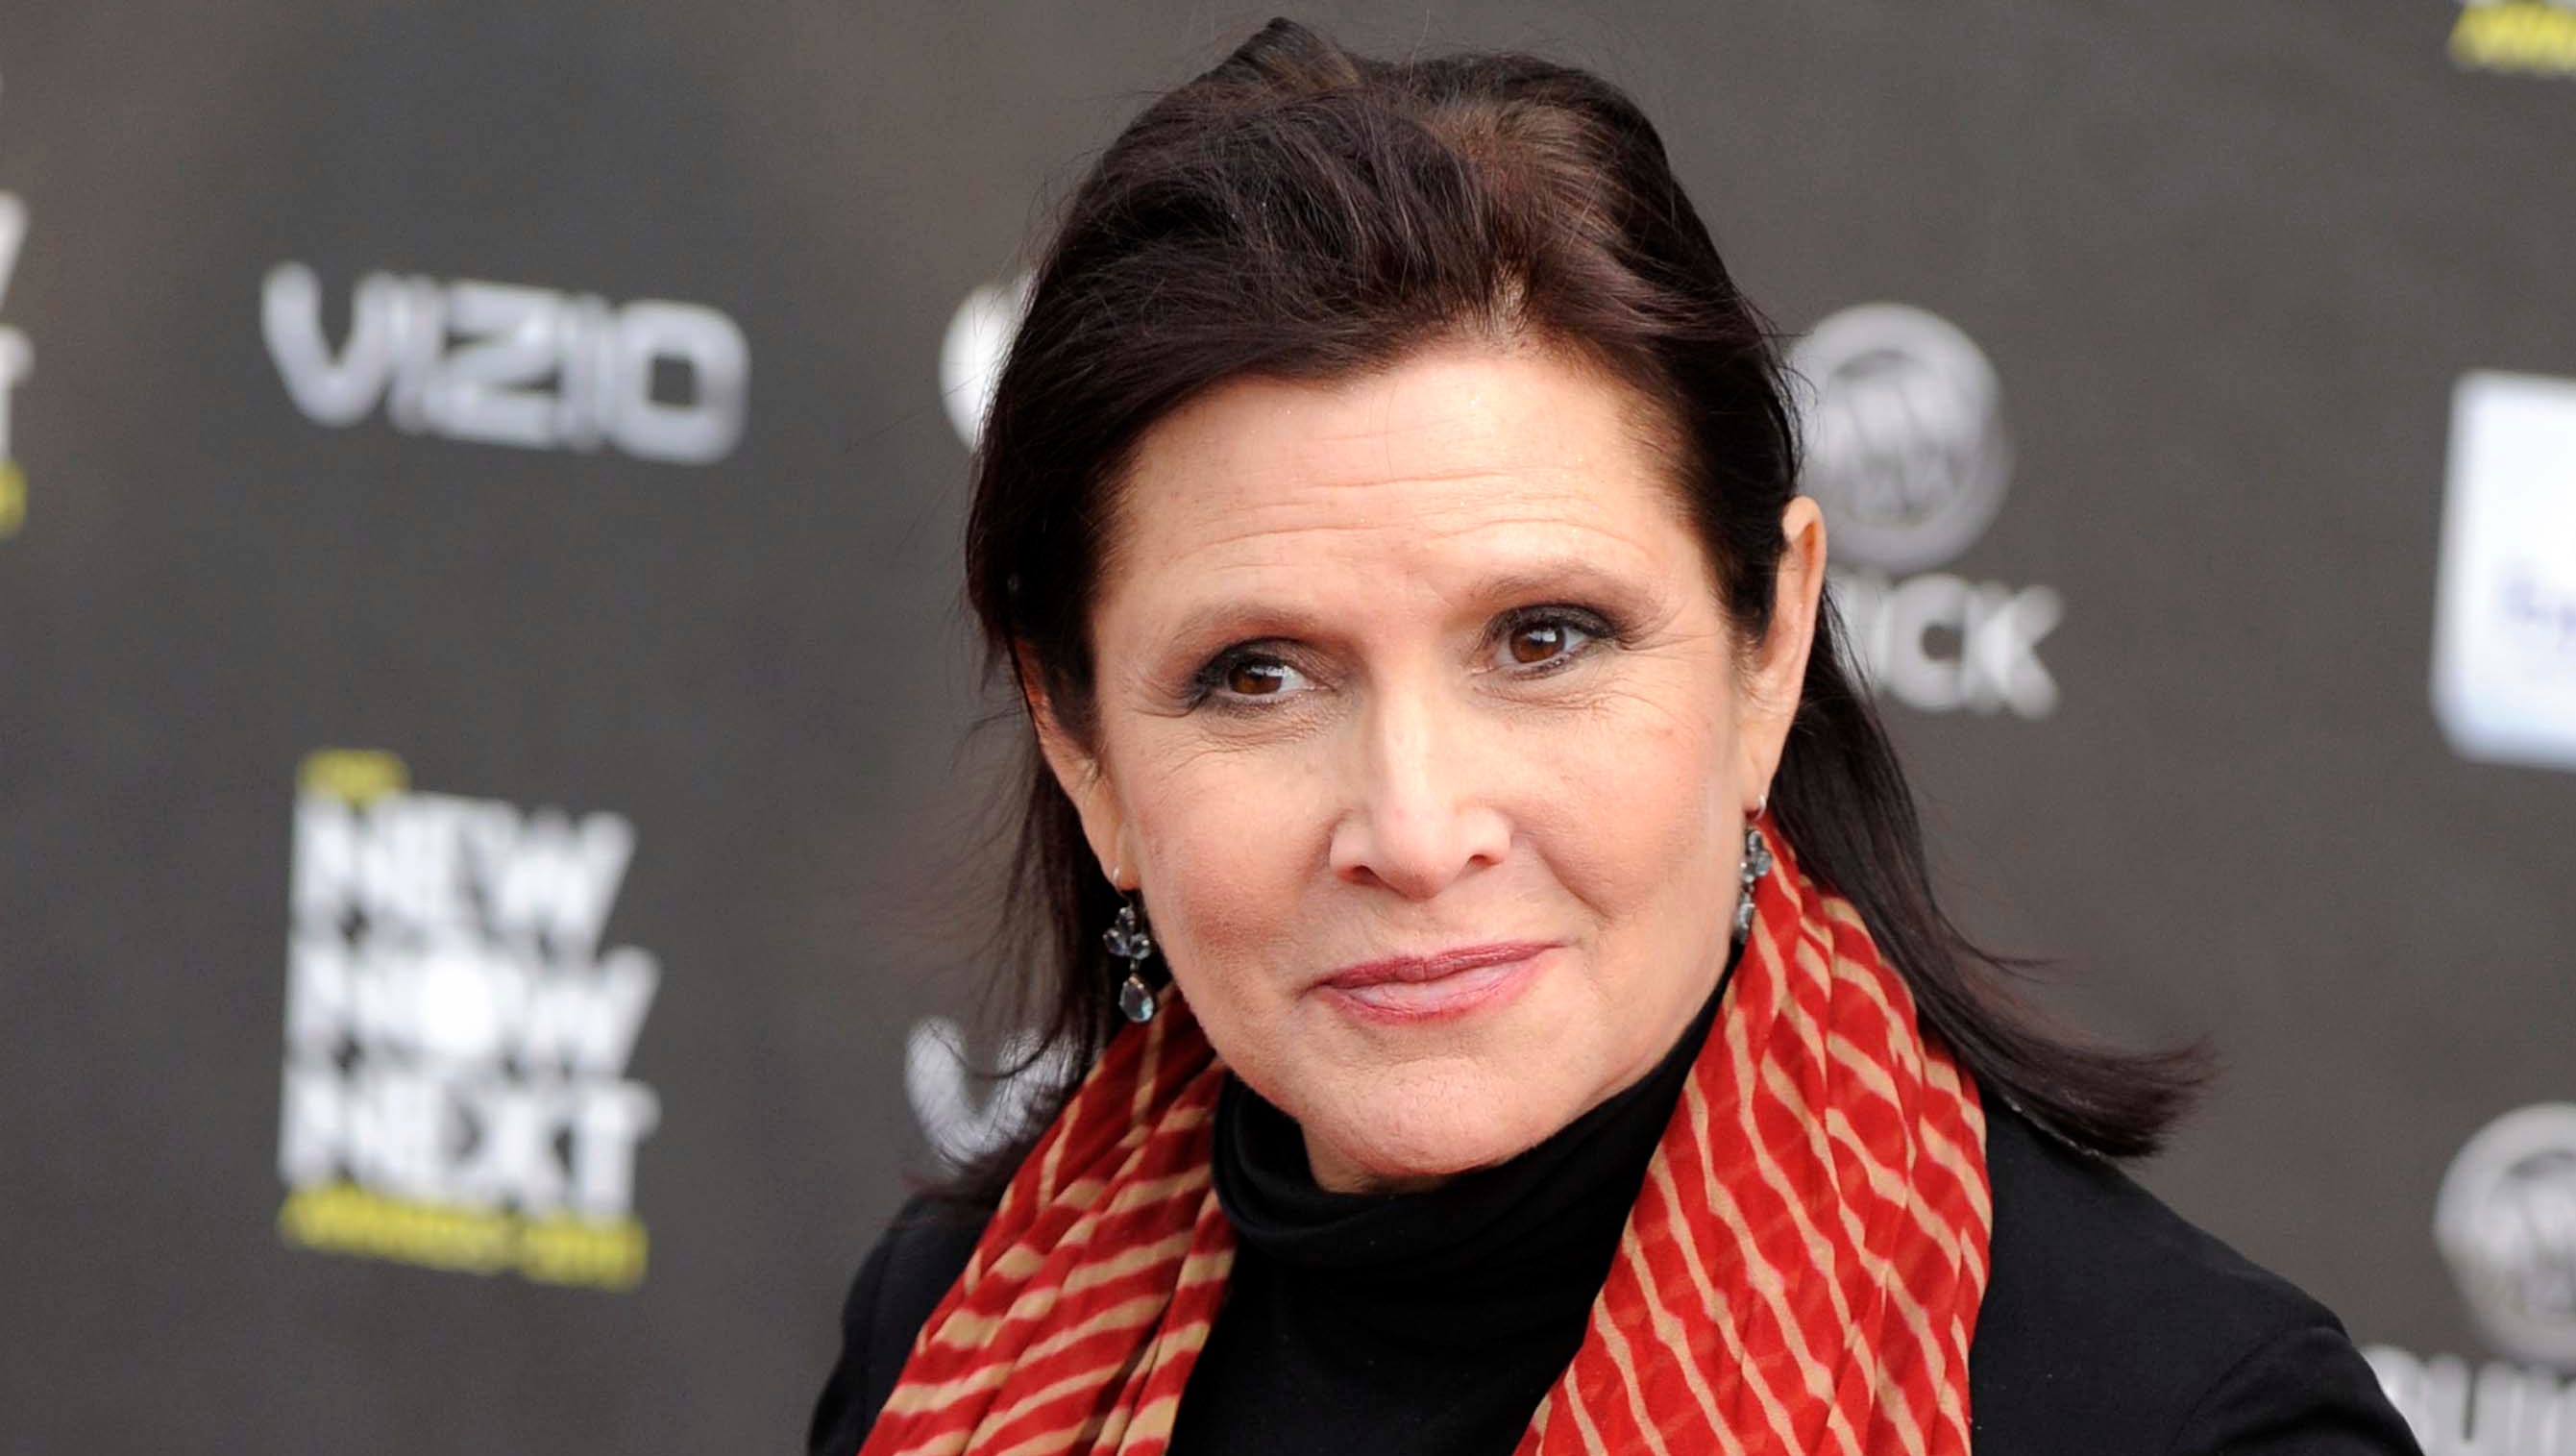 Carrie Fisher died from sleep apnea, other factors, coroner says